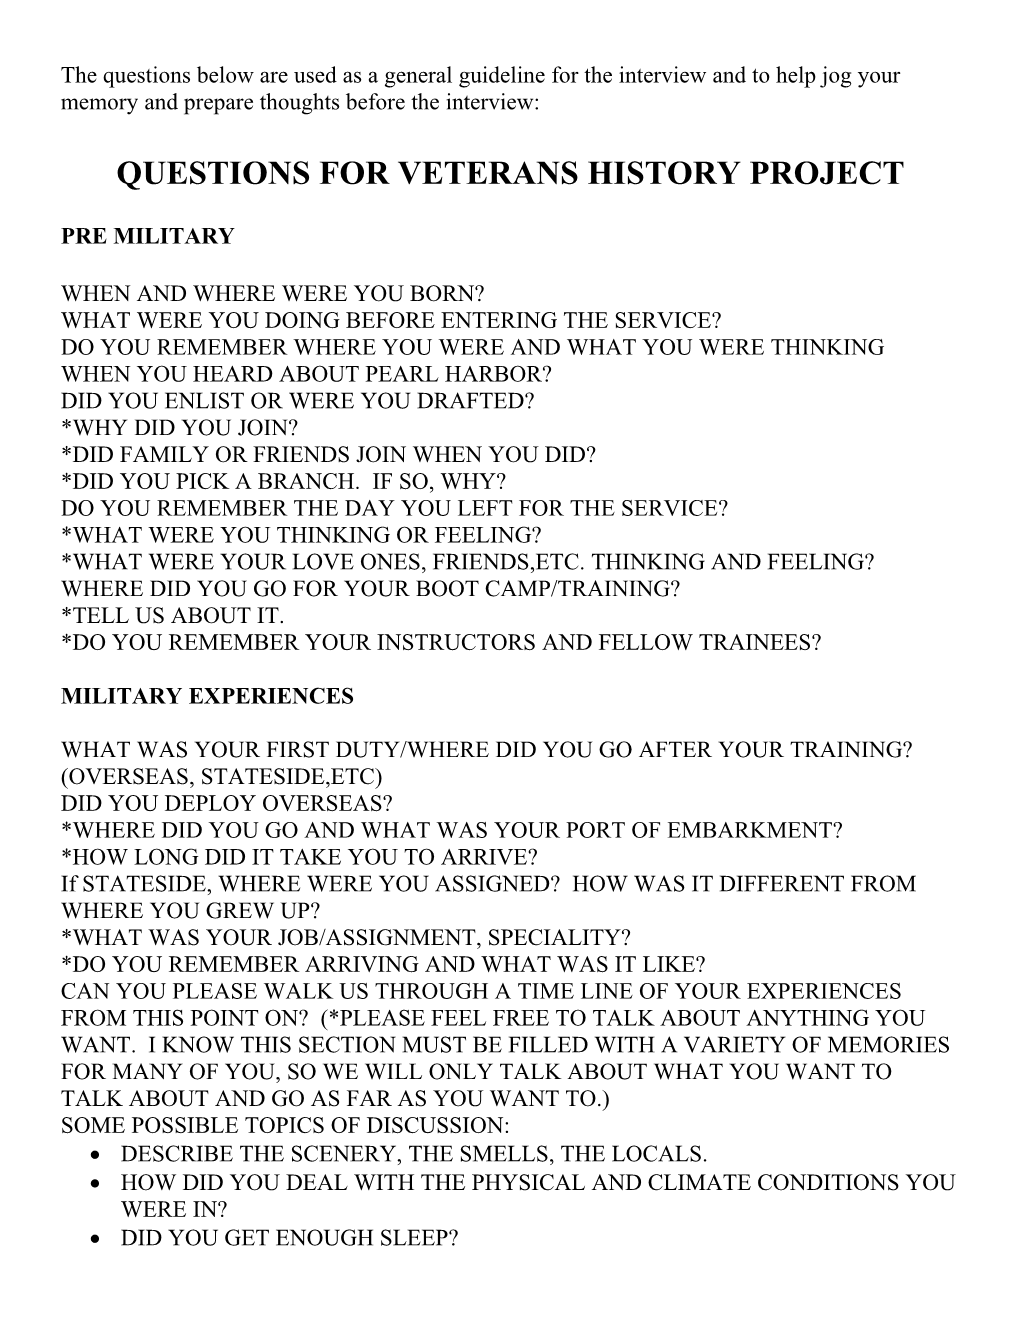 Questions for Veterans Oral History Project